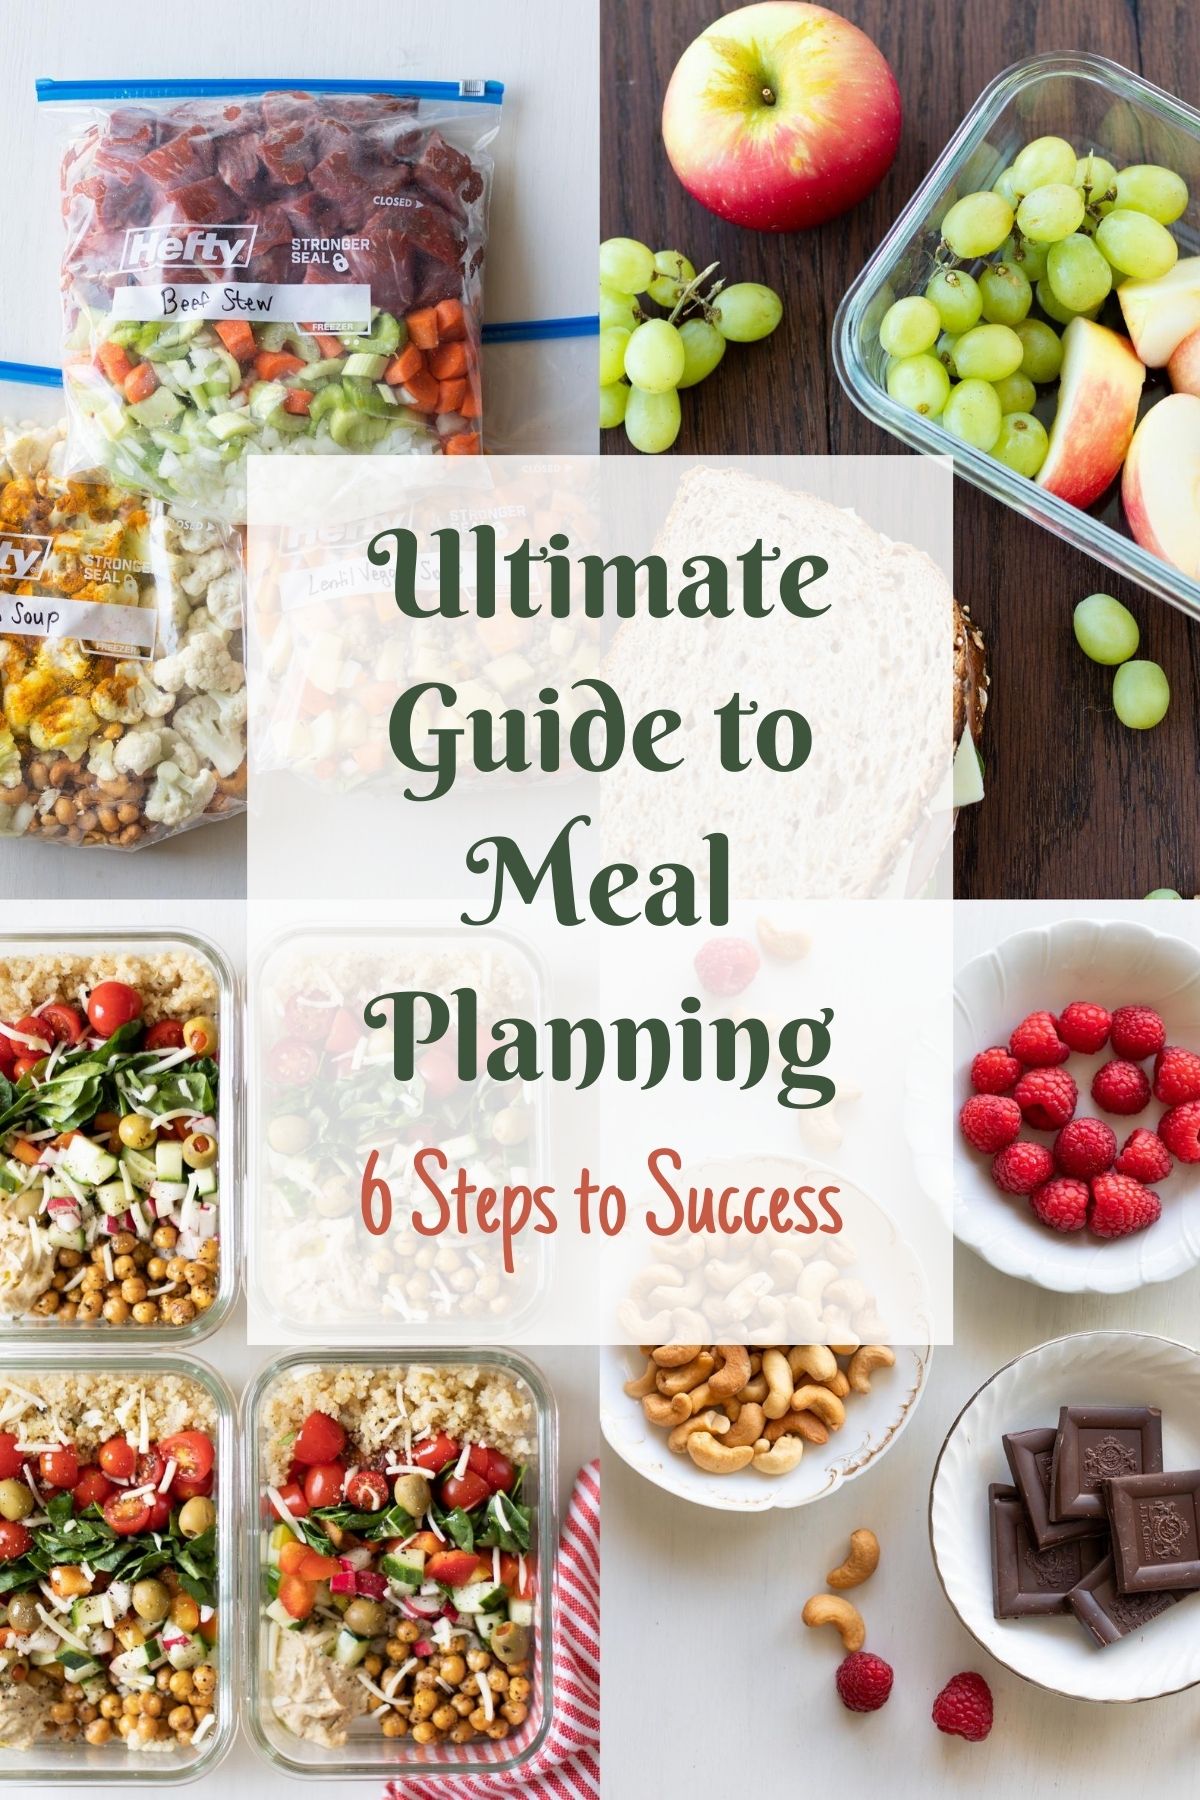 The Ultimate Meal Planning Guide: 6 Steps to Success - Anya's Cookbook